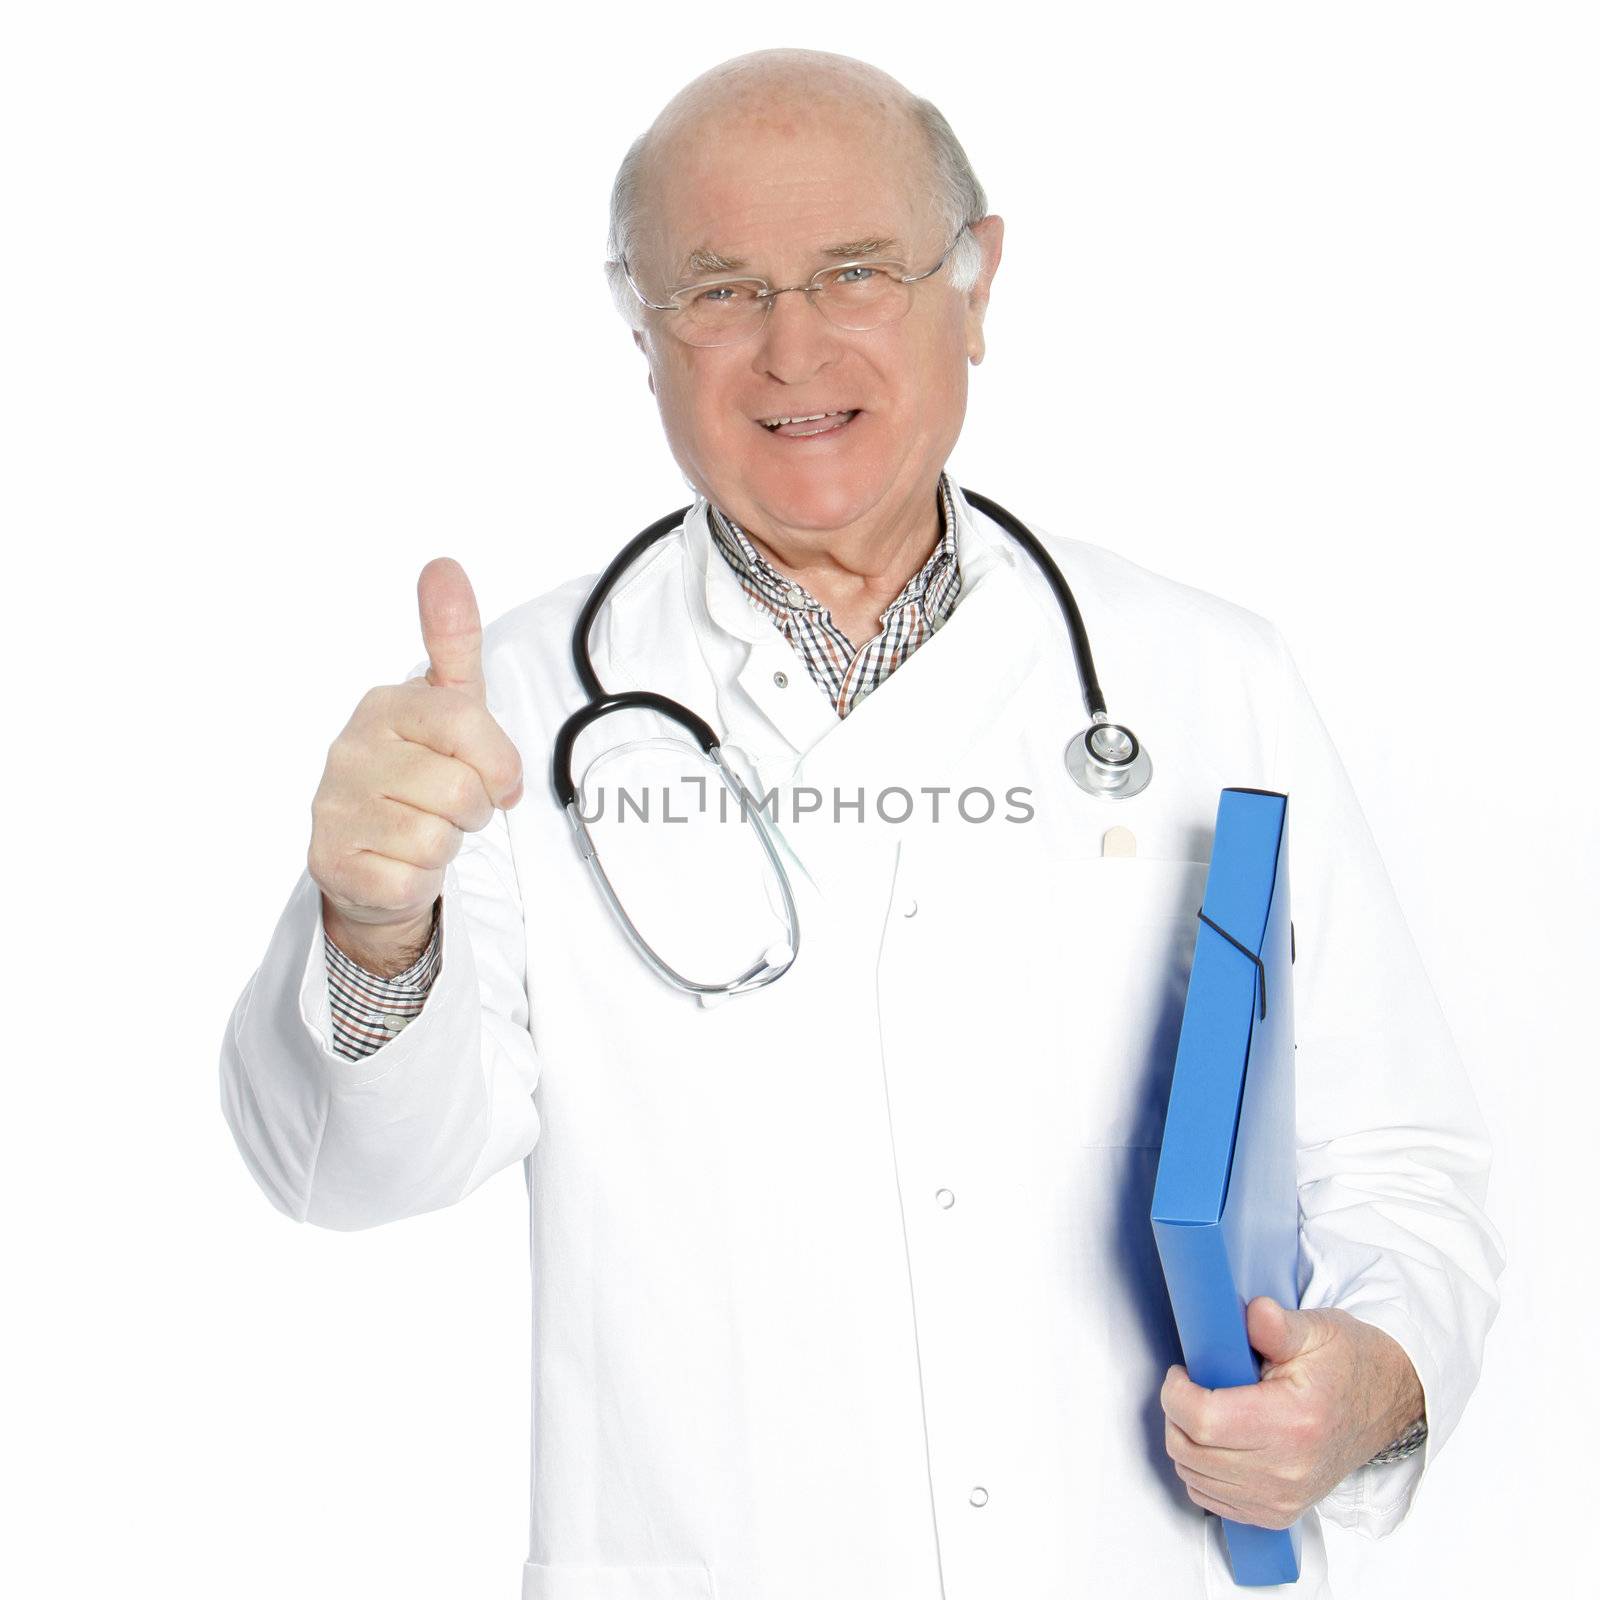 Confident senior doctor or consultant by Farina6000